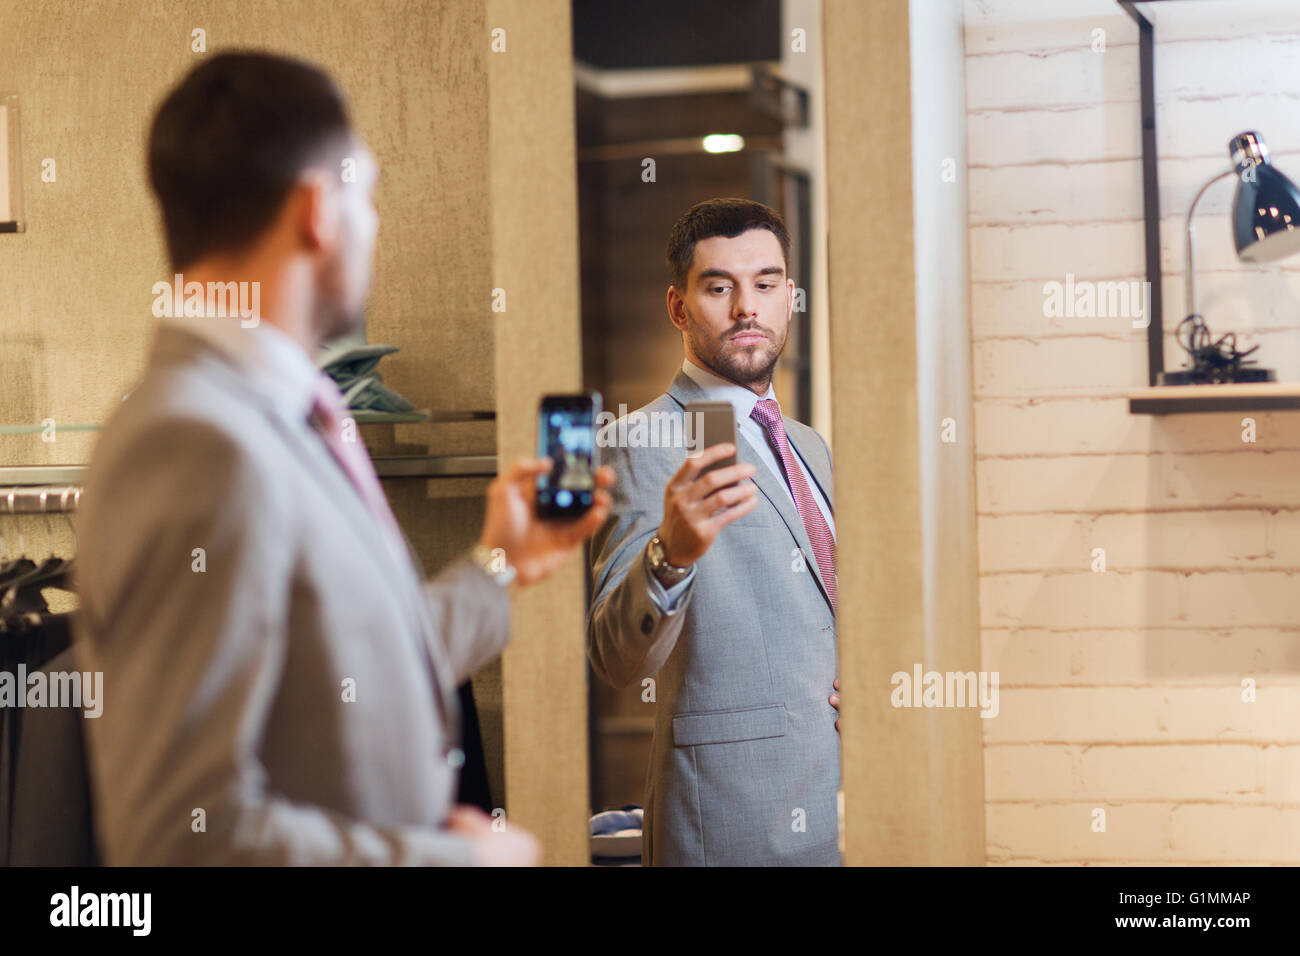 man in suit taking mirror selfie at clothing store Stock Photo